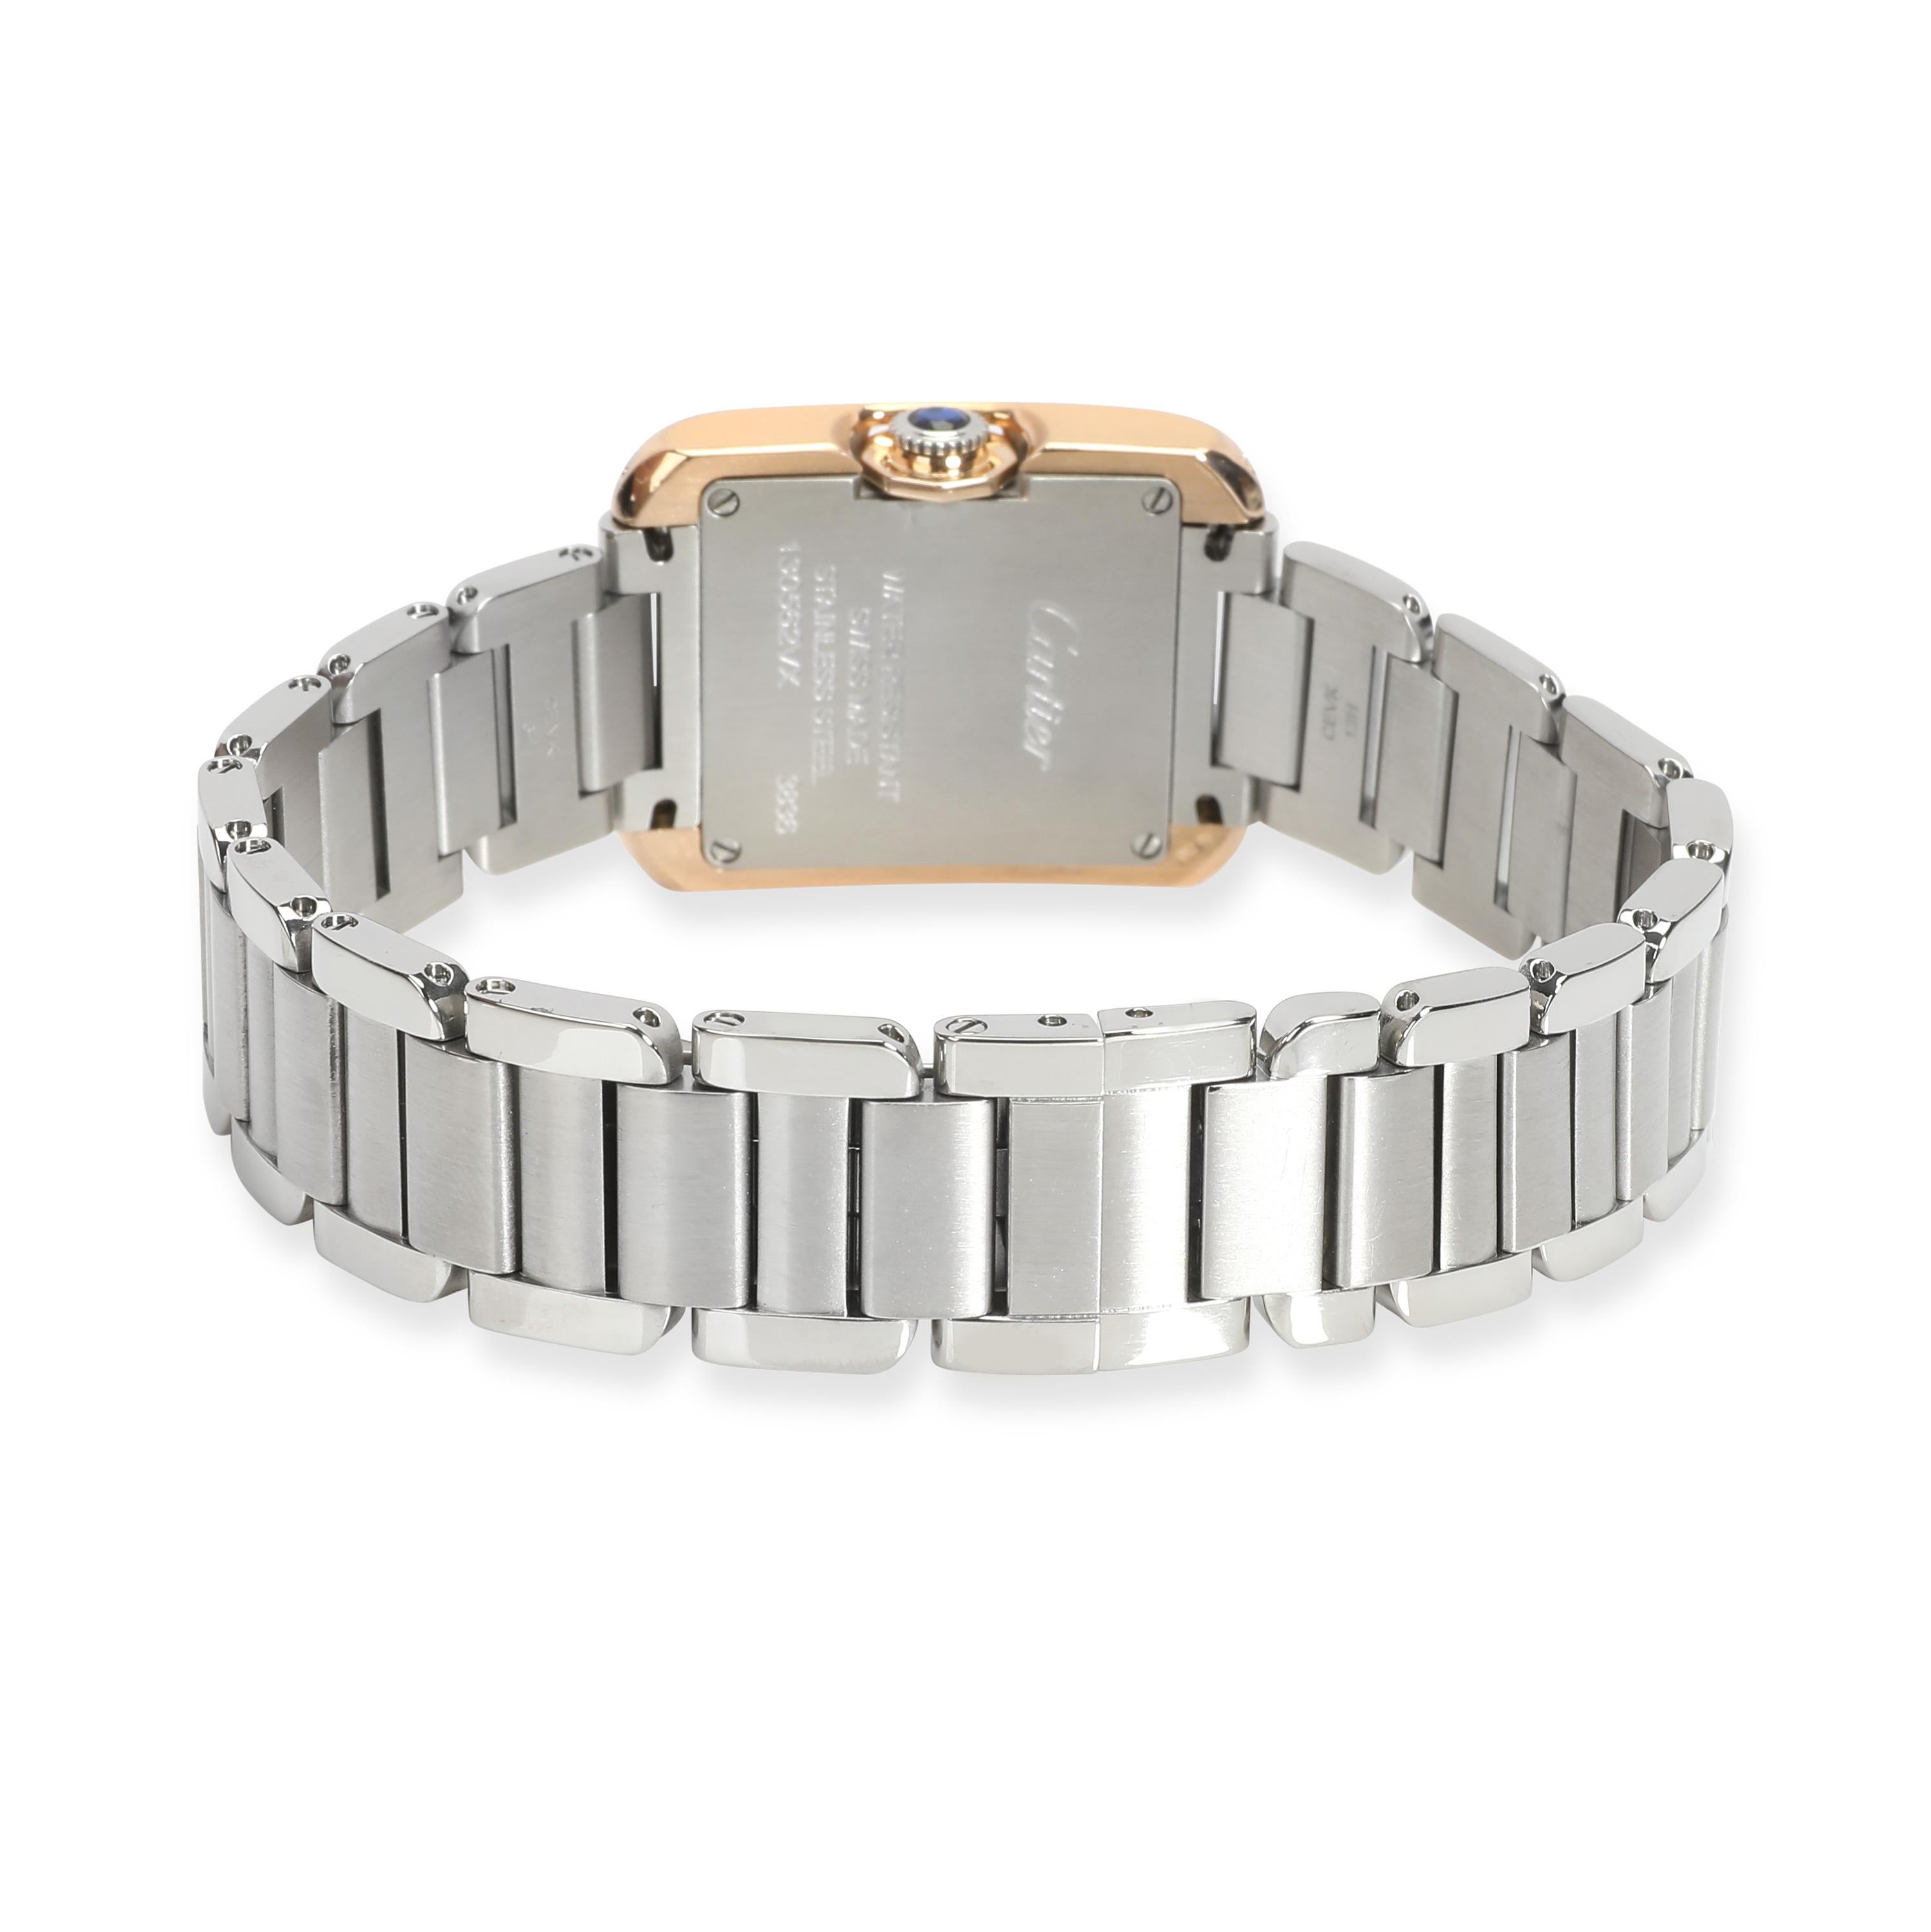 Cartier Tank Anglaise W3TA0002 Women's Watch in 18kt Yellow Gold/Steel

SKU: 105976

PRIMARY DETAILS
Brand:  Cartier
Model: Tank Anglaise
Country of Origin: Switzerland
Movement Type: Quartz: Battery
Year of Manufacture: 2010-2019

Retail price